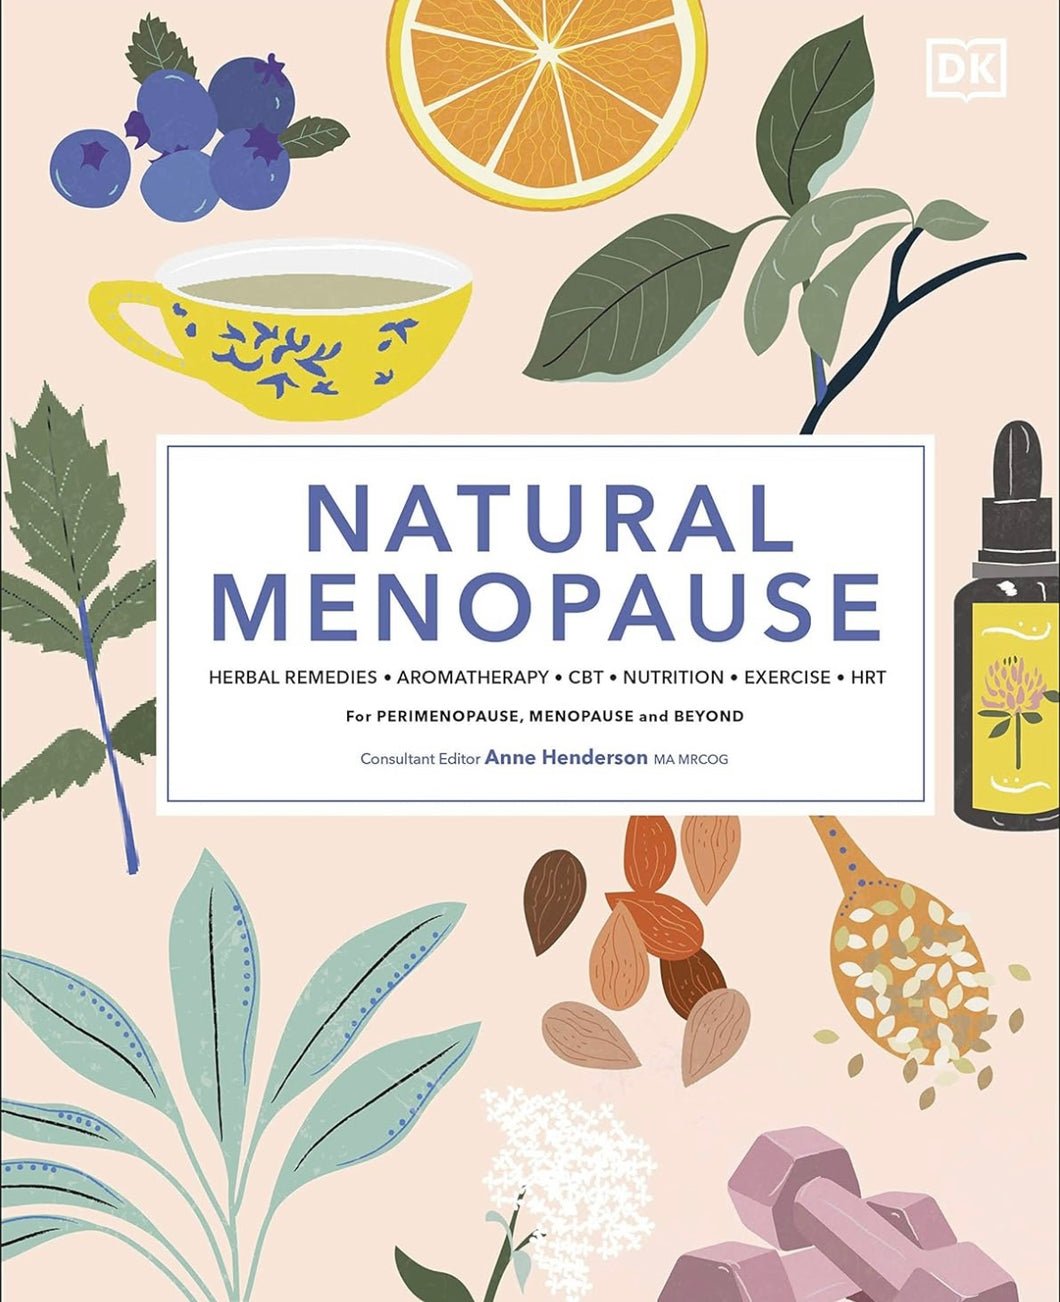 Natural Menopause: Herbal Remedies, Aromatherapy, CBT, Nutrition, Exercise, HRT...for Perimenopause, Menopause, and Beyond HALF PRICE RRP